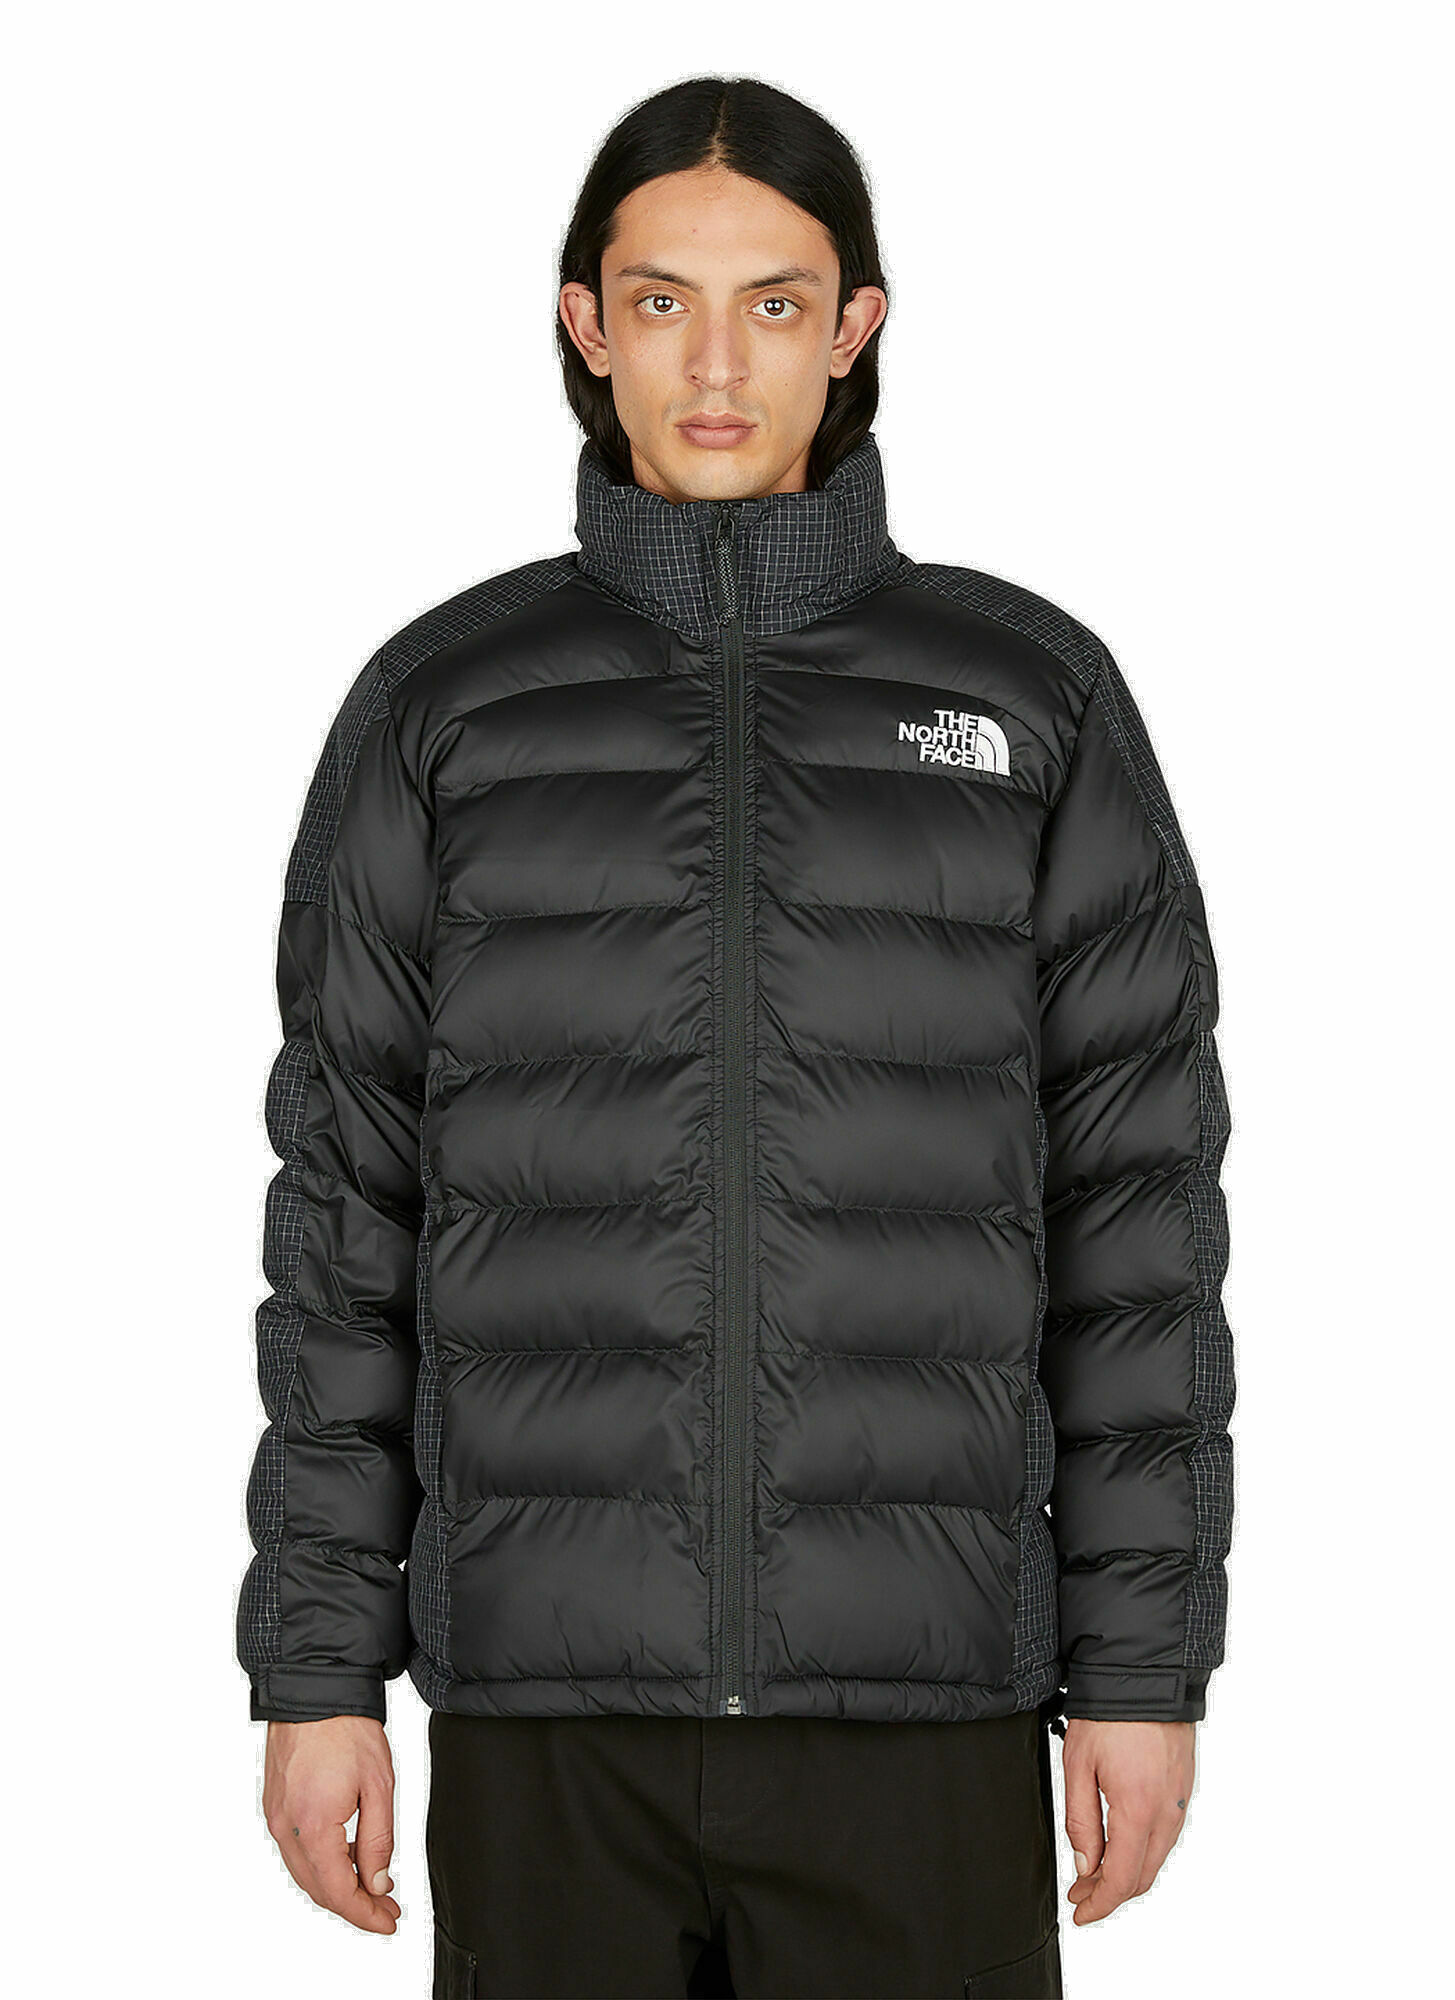 The North Face - Rusta Puffer Jacket in Black The North Face